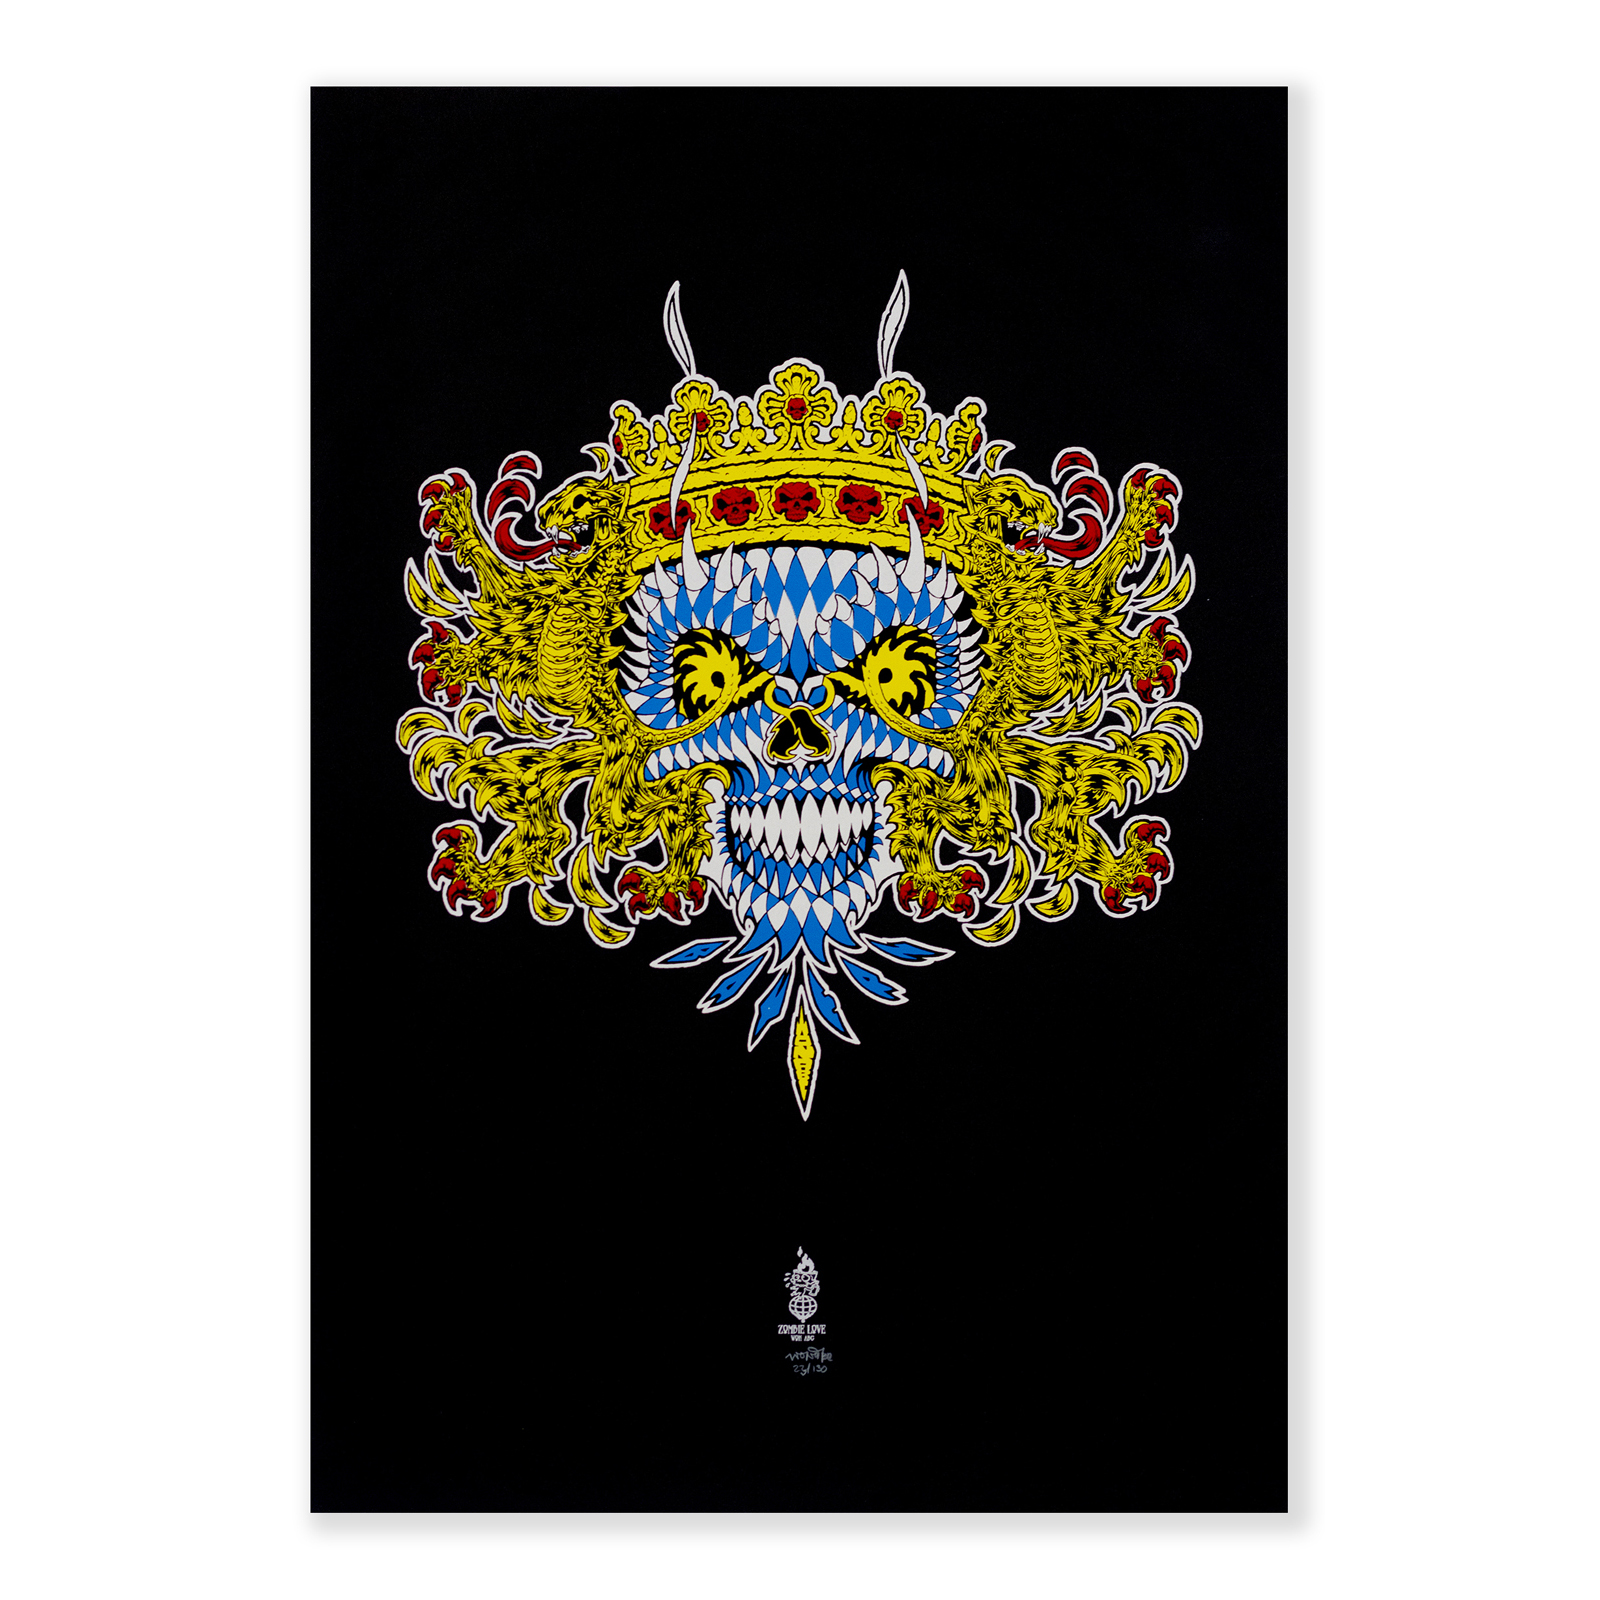 Bavarian Coat of Arms